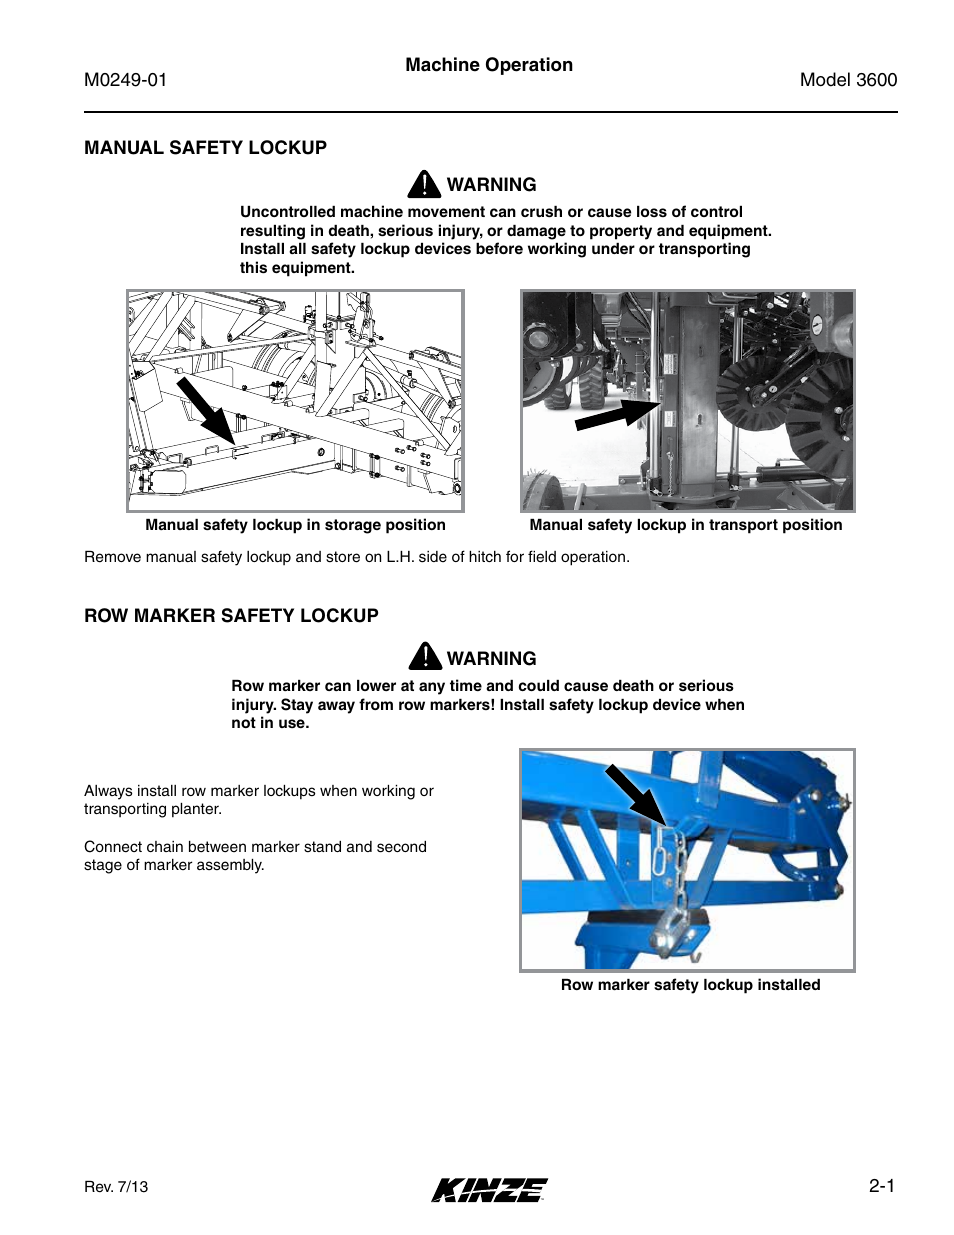 Machine operation, Manual safety lockup, Row marker safety lockup | Manual safety lockup -1, Row marker safety lockup -1 | Kinze 3600 Lift and Rotate Planter (70 CM) Rev. 5/14 User Manual | Page 13 / 158